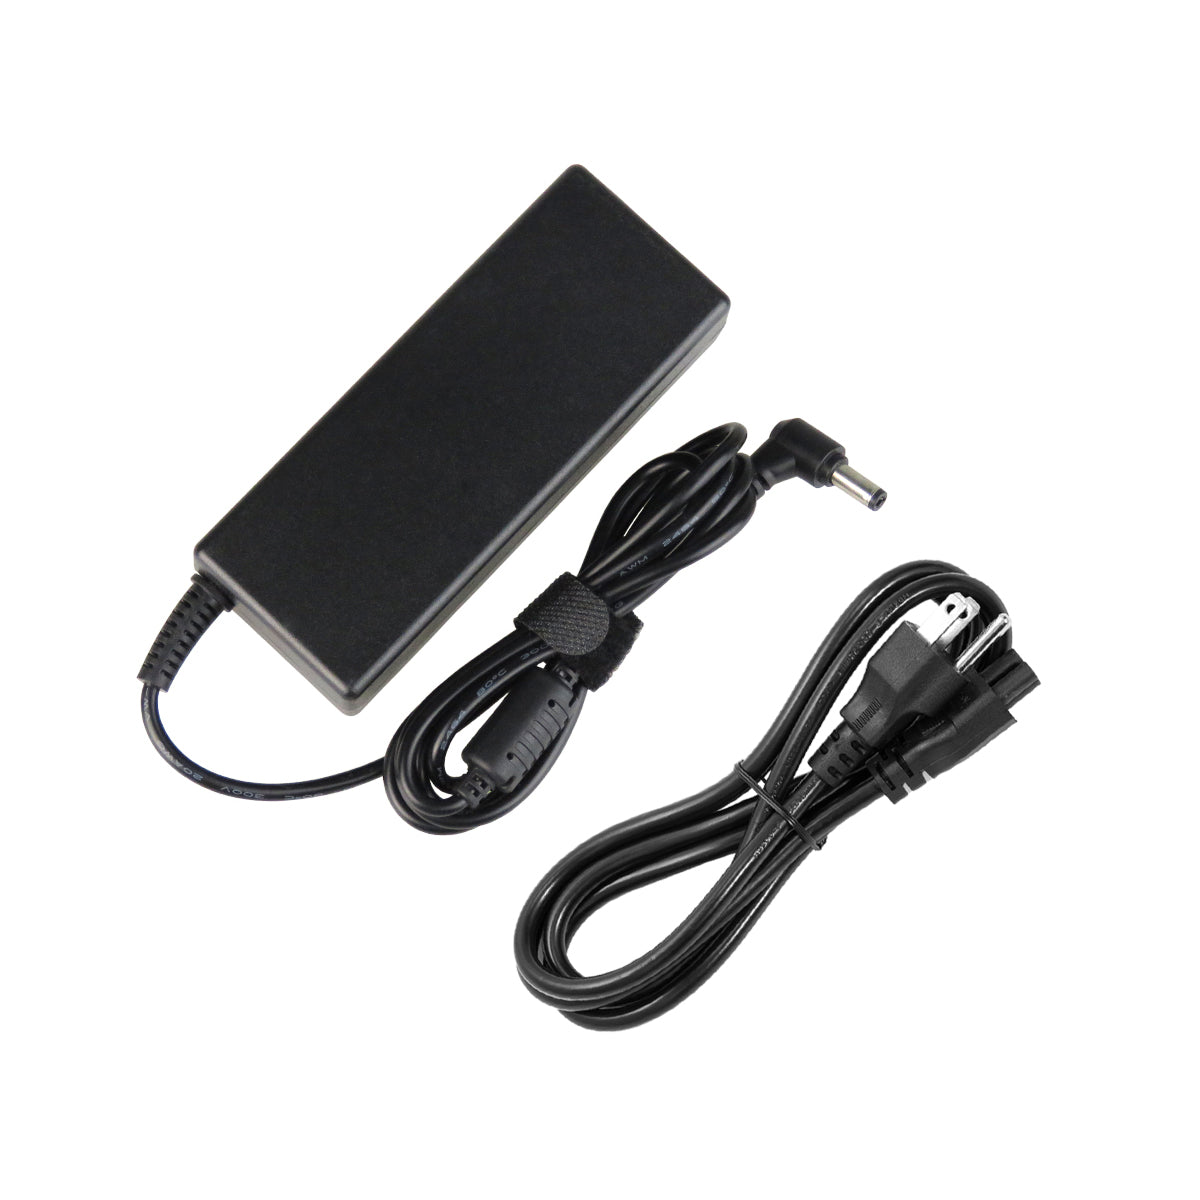 AC Adapter Charger for ASUS A46 Notebook.